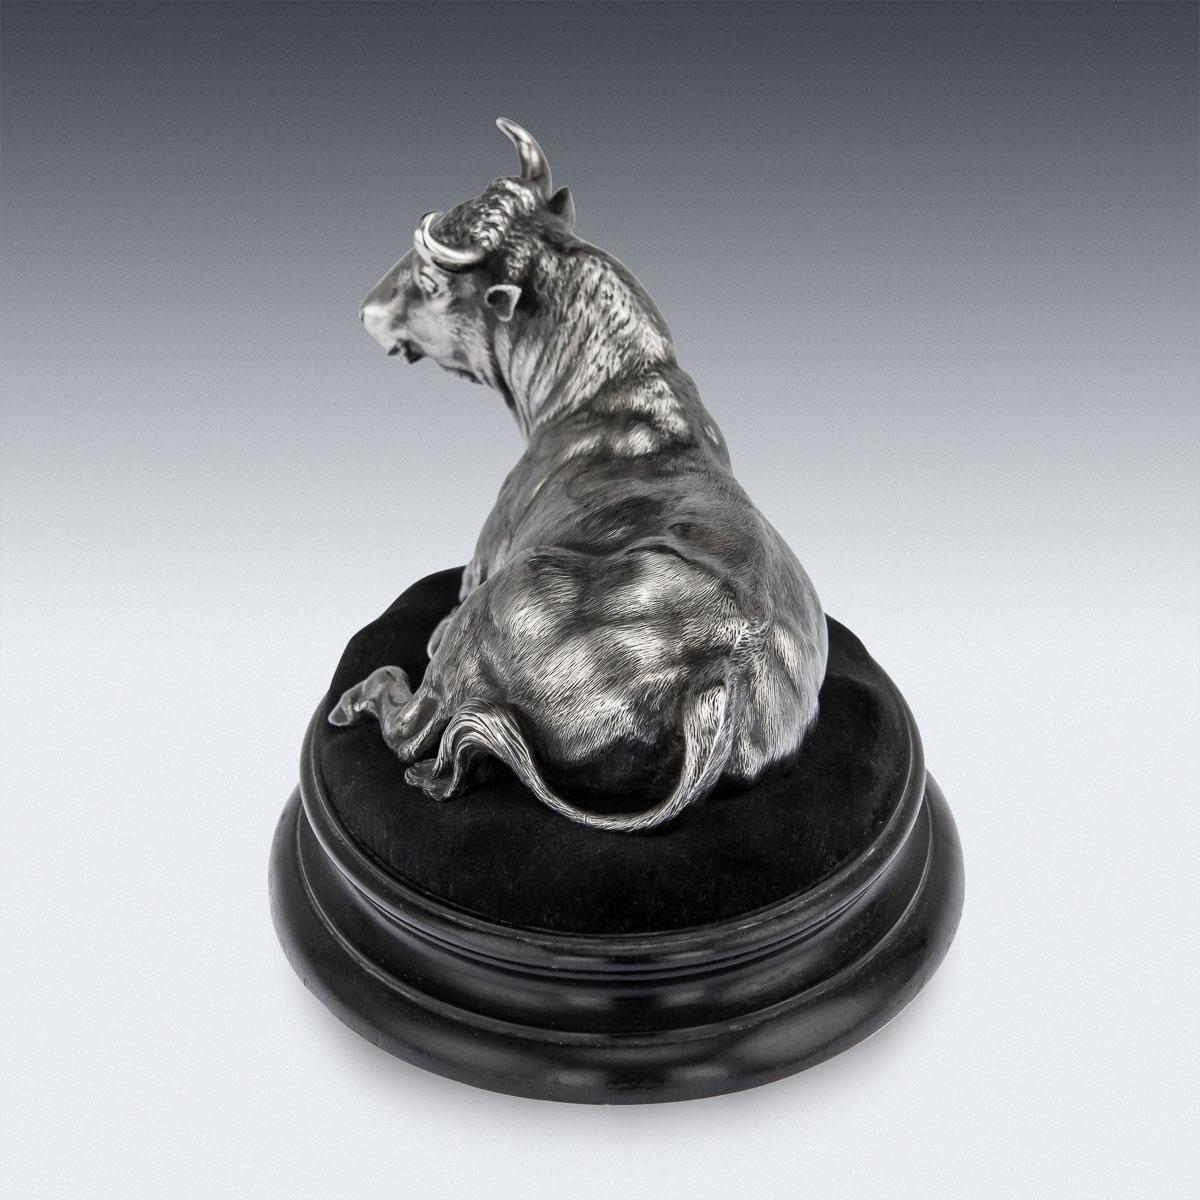 Antique 19th Century French solid silver figural statue, beautifully modelled depicting a resting bull on an ebony base. The sculptural figure is modelled to the highest quality, undoubtedly by one of the best French sculptors and silversmiths of